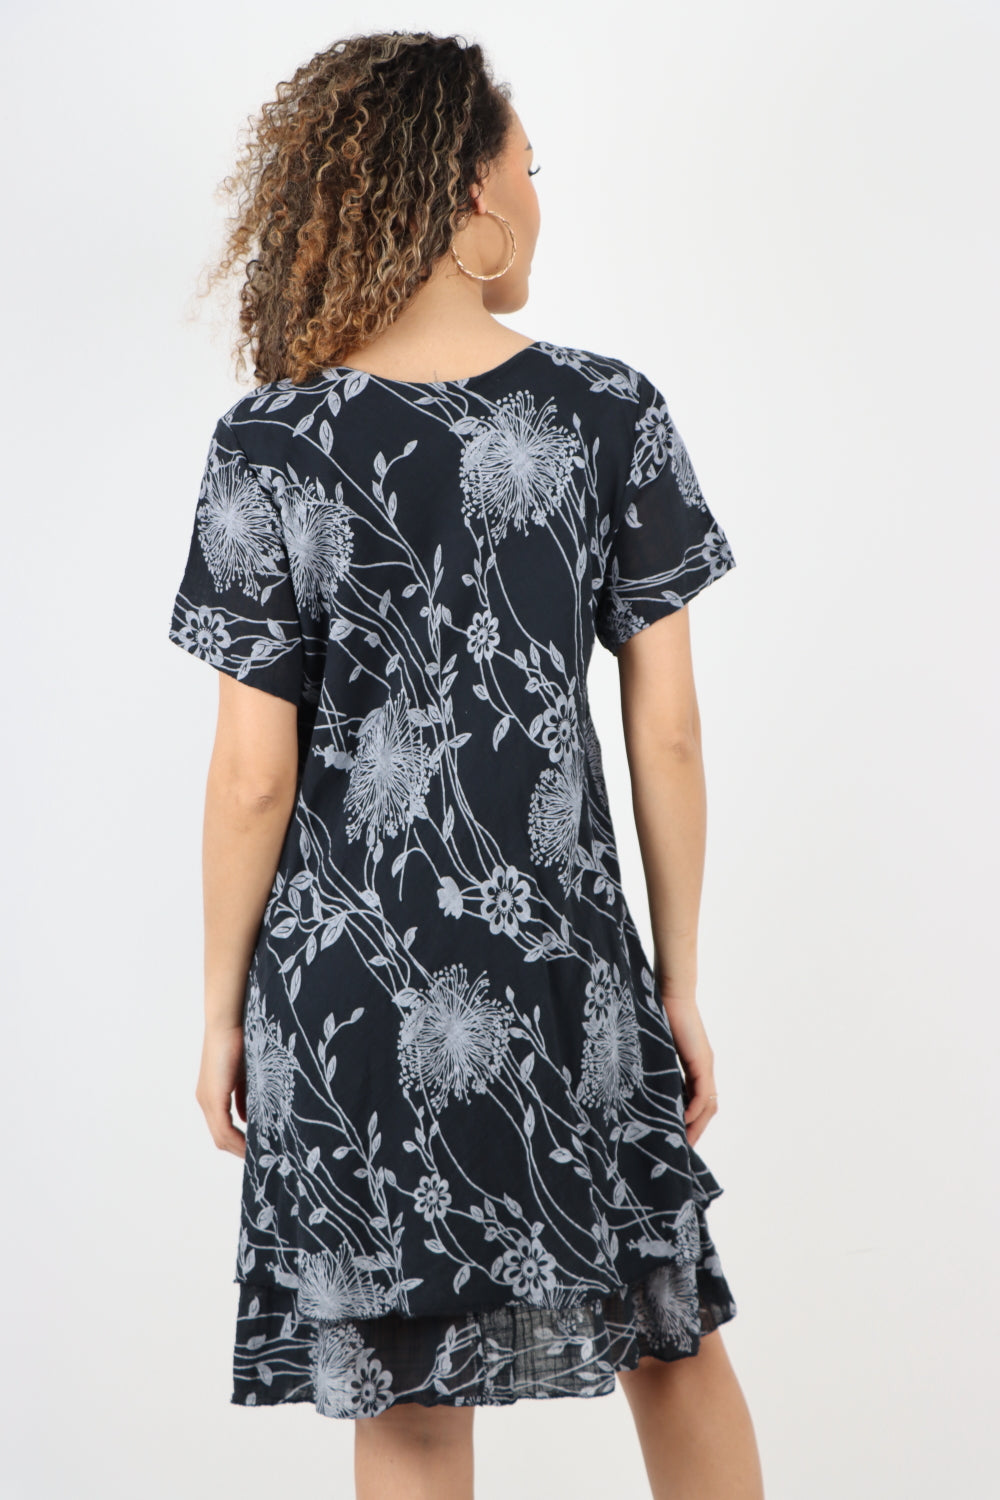 Double Layer Floral Print  Short Sleeve Dress